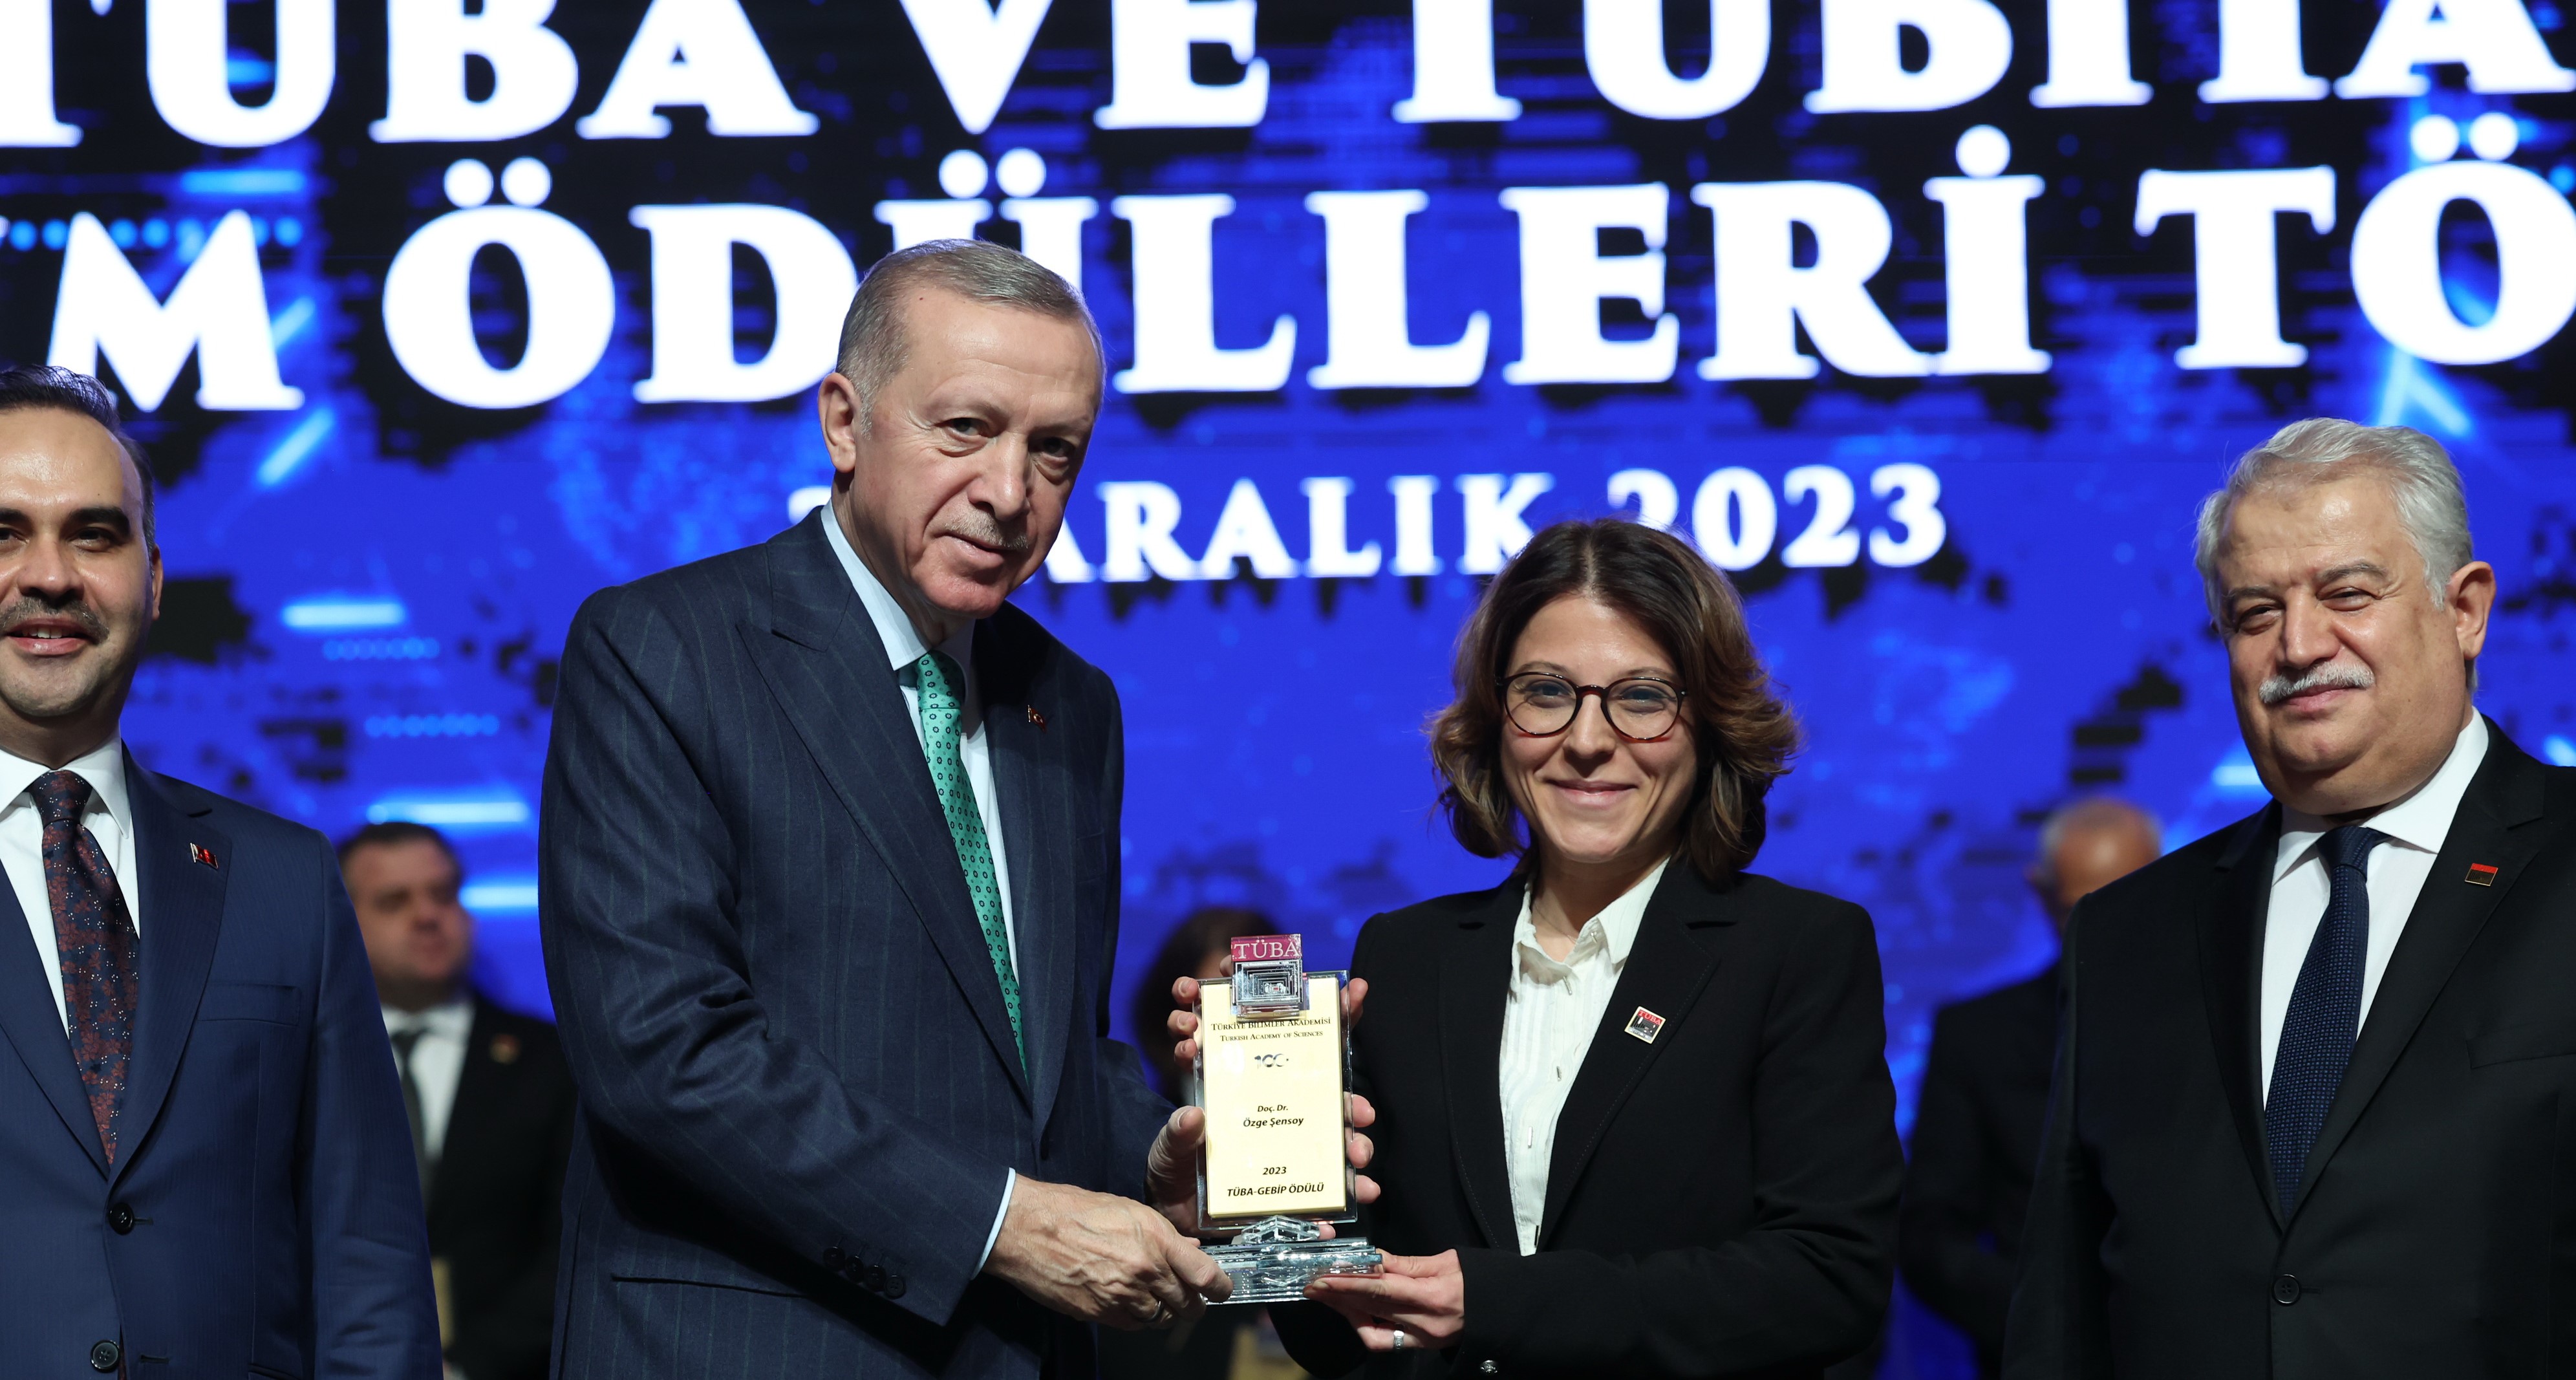 Dr. Şensoy was honored with the TÜBA-GEBİP Award